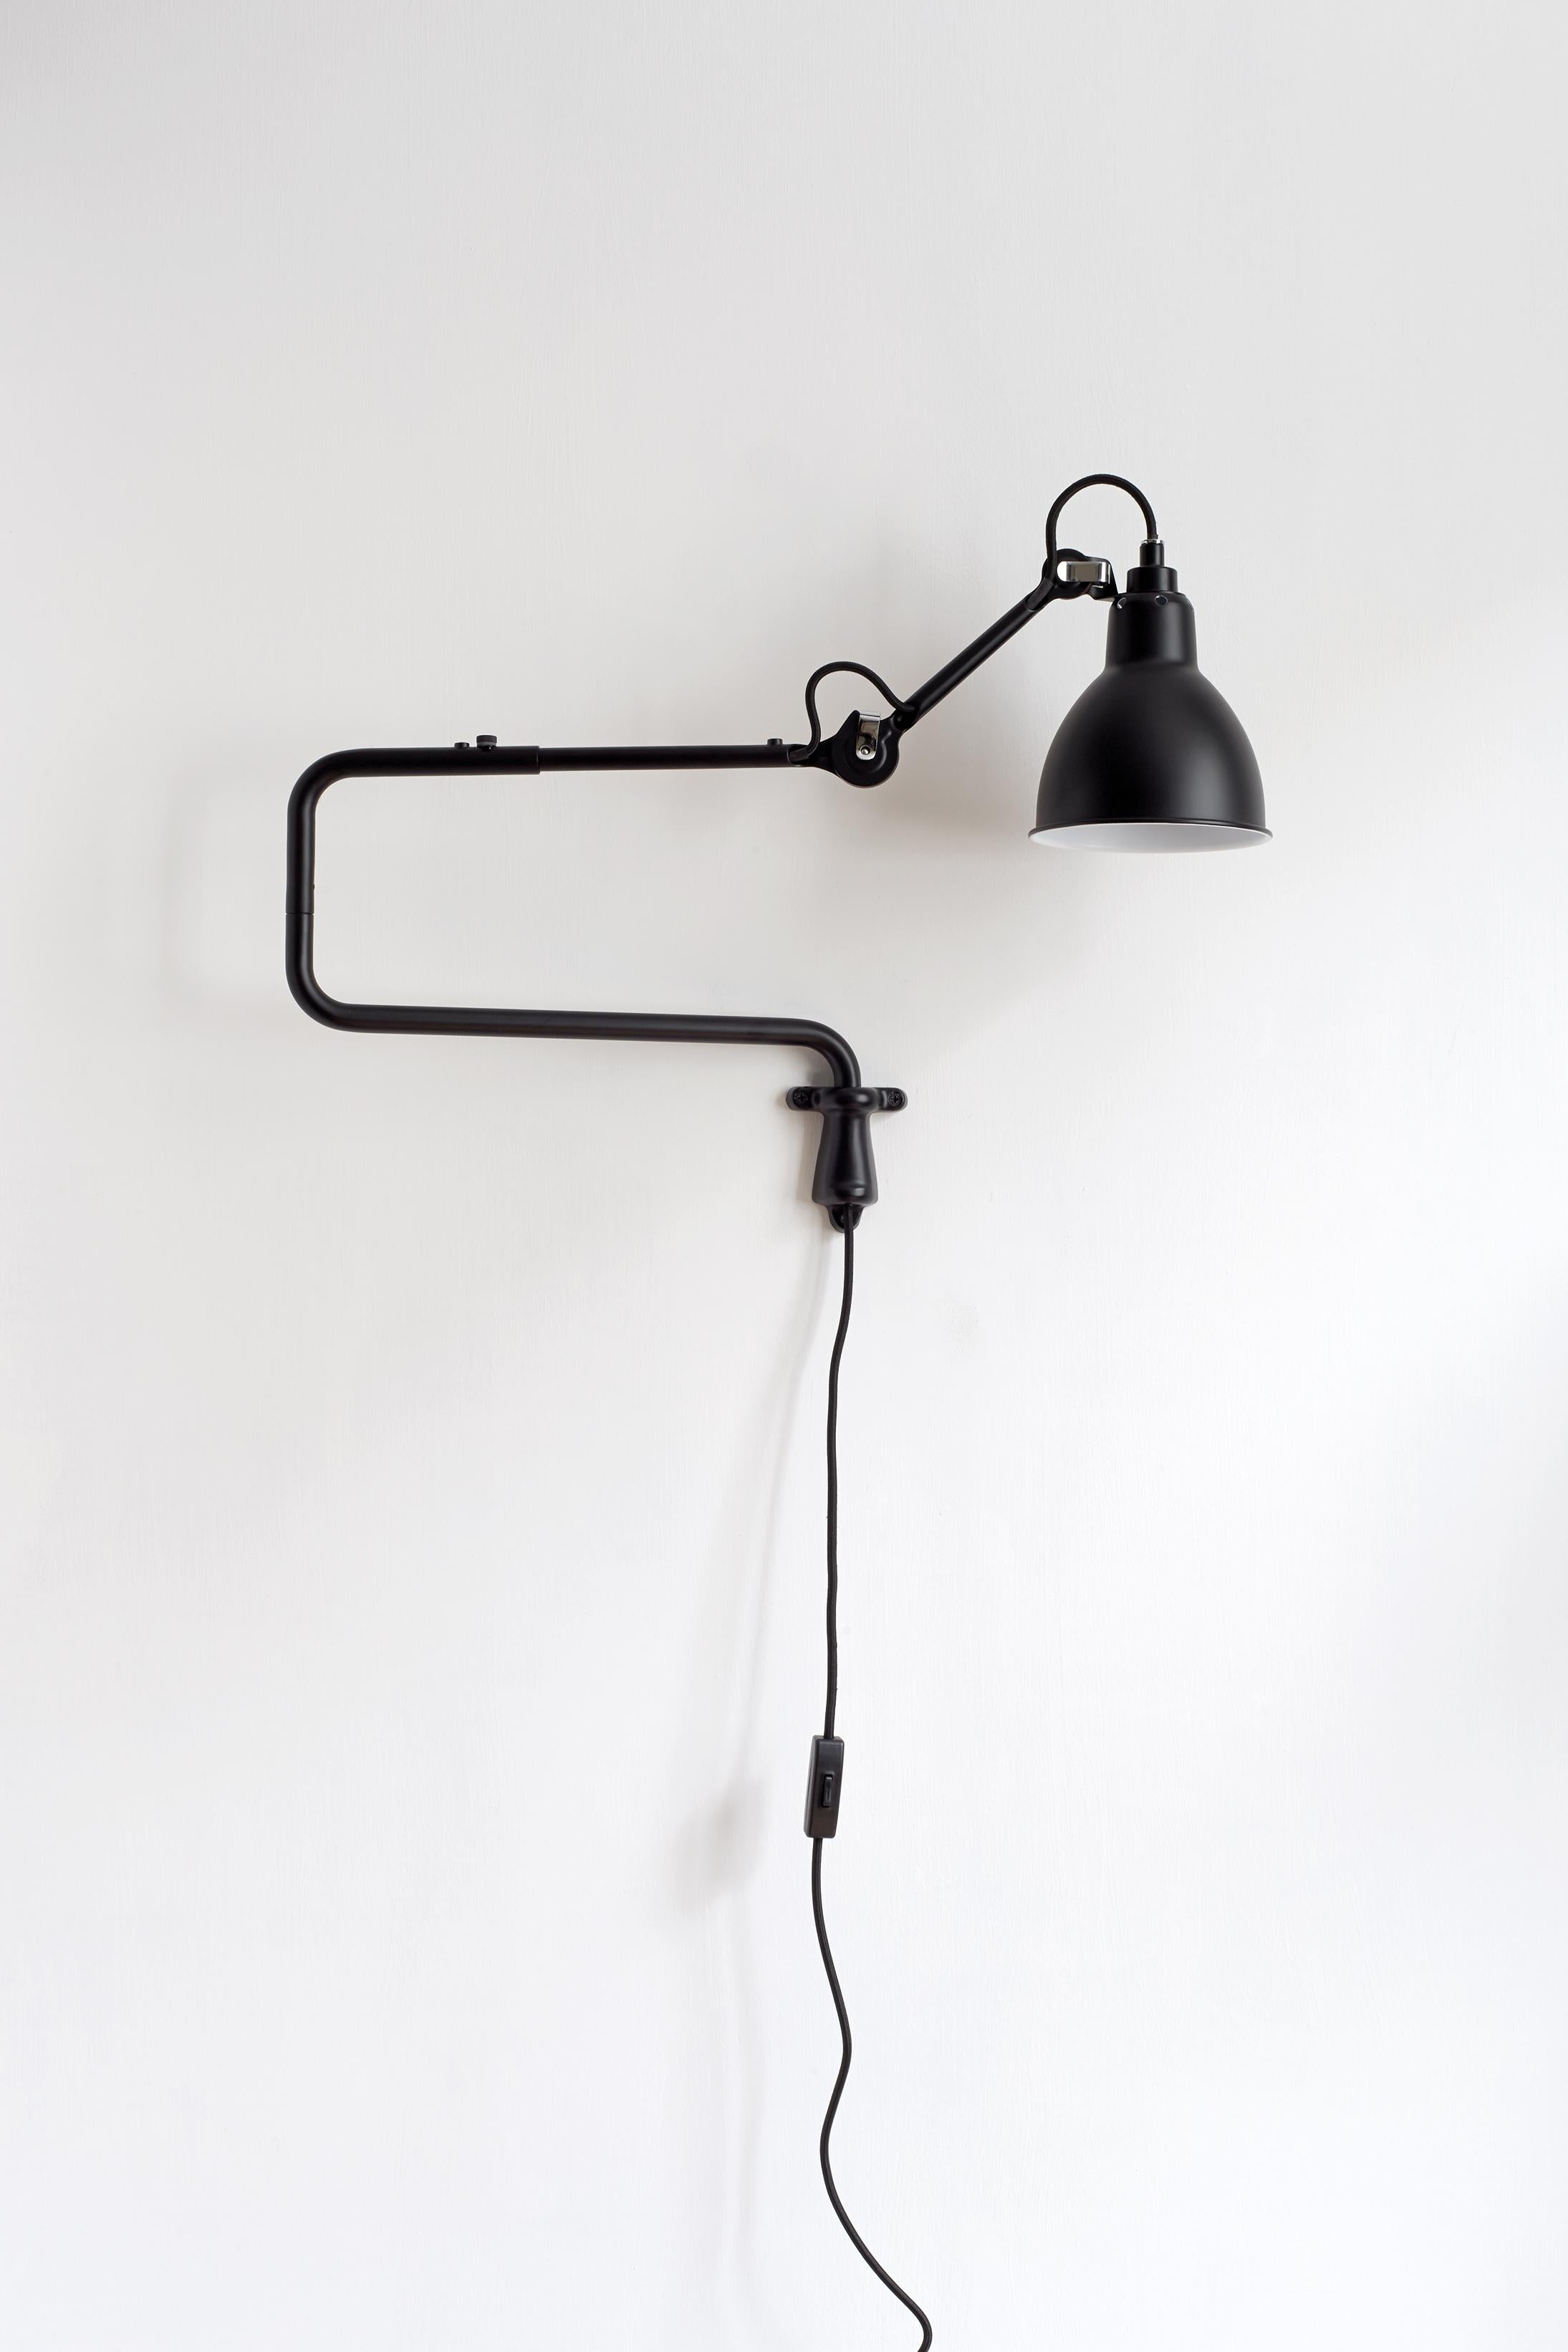 DCW Editions La Lampe Gras N°303 Wall Lamp in Black Steel Arm and Black Shade by Bernard-Albin Gras
 
 In 1921 Bernard-Albin GRAS designed a series of lamps for use in offices and in industrial environments. The GRAS lamp, as it was subsequently